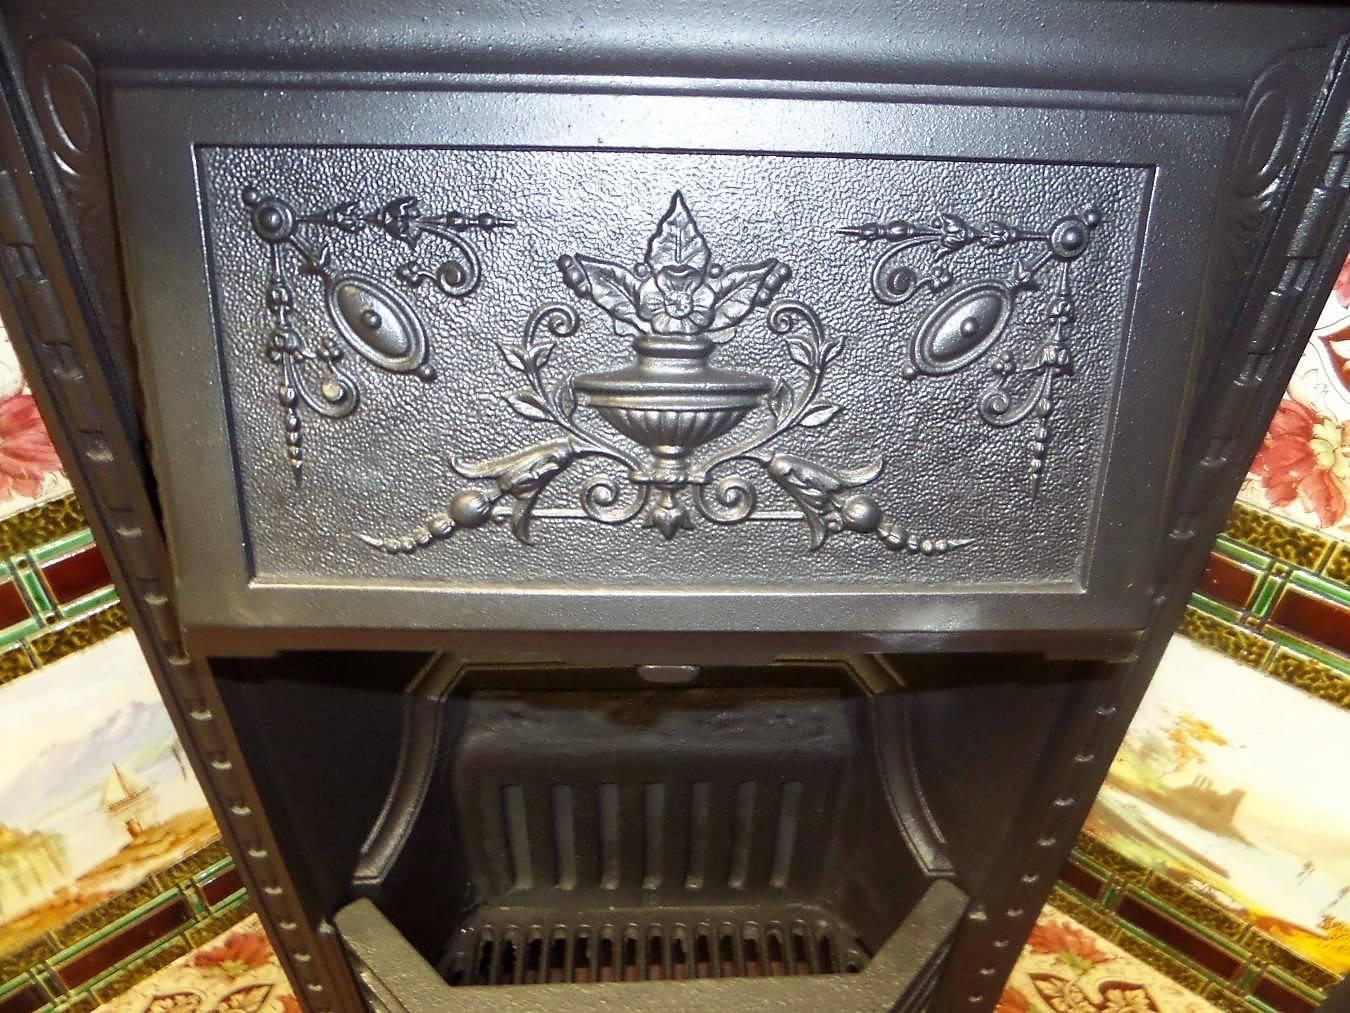 Antique restored 19th century Victorian cast iron fireplace Insert with its original Victorian tile set from a house in Leicestershire England. With its original solid fuel metal fire back and grate it is completed with a damper chimney isolation